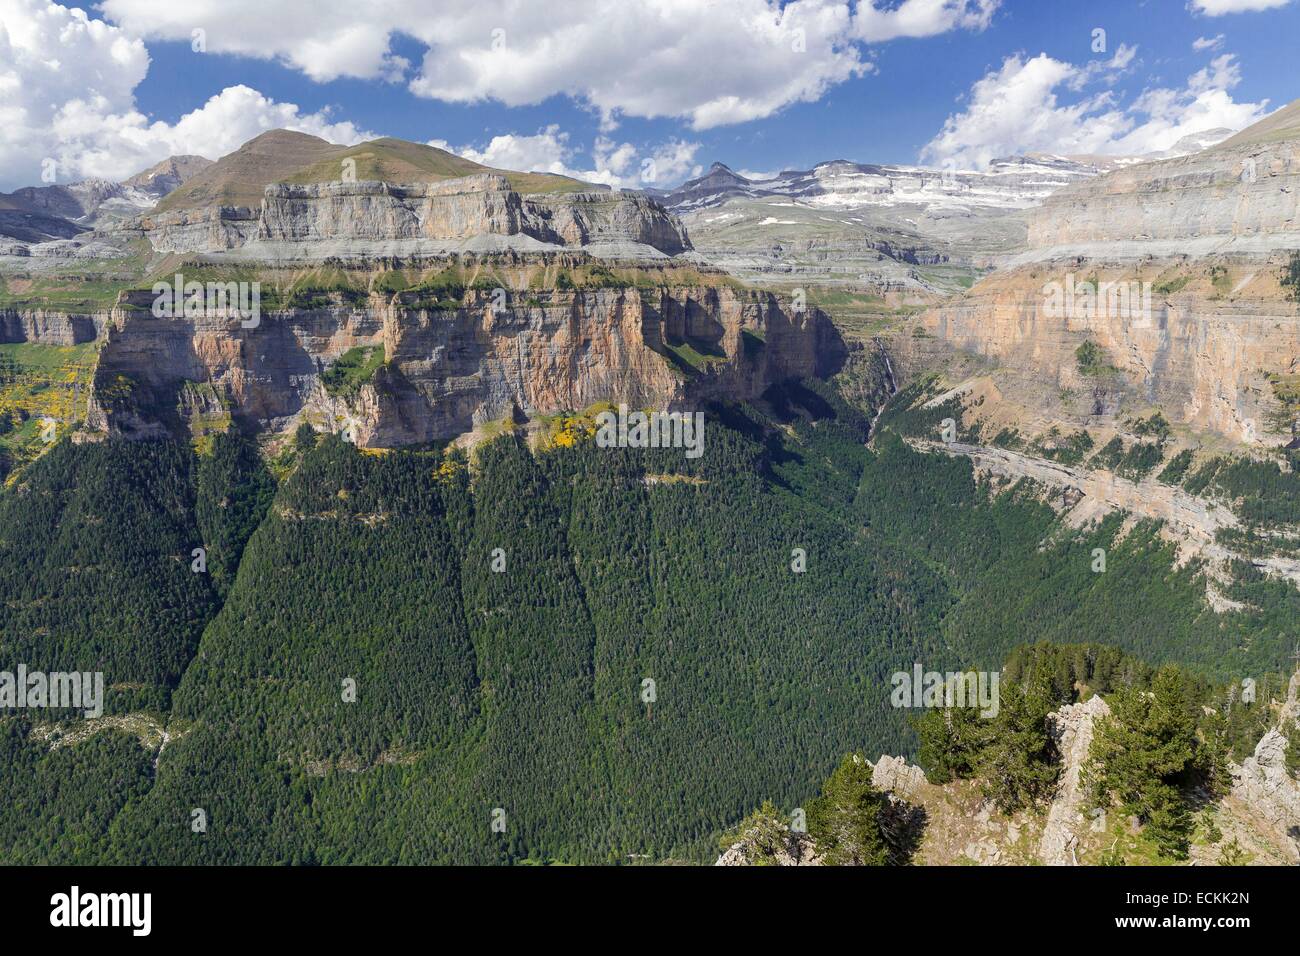 Spain, Aragon, Torla, Ordesa and Mont Perdu national park, listed as World Heritage by UNESCO, Ordesa canyon Stock Photo